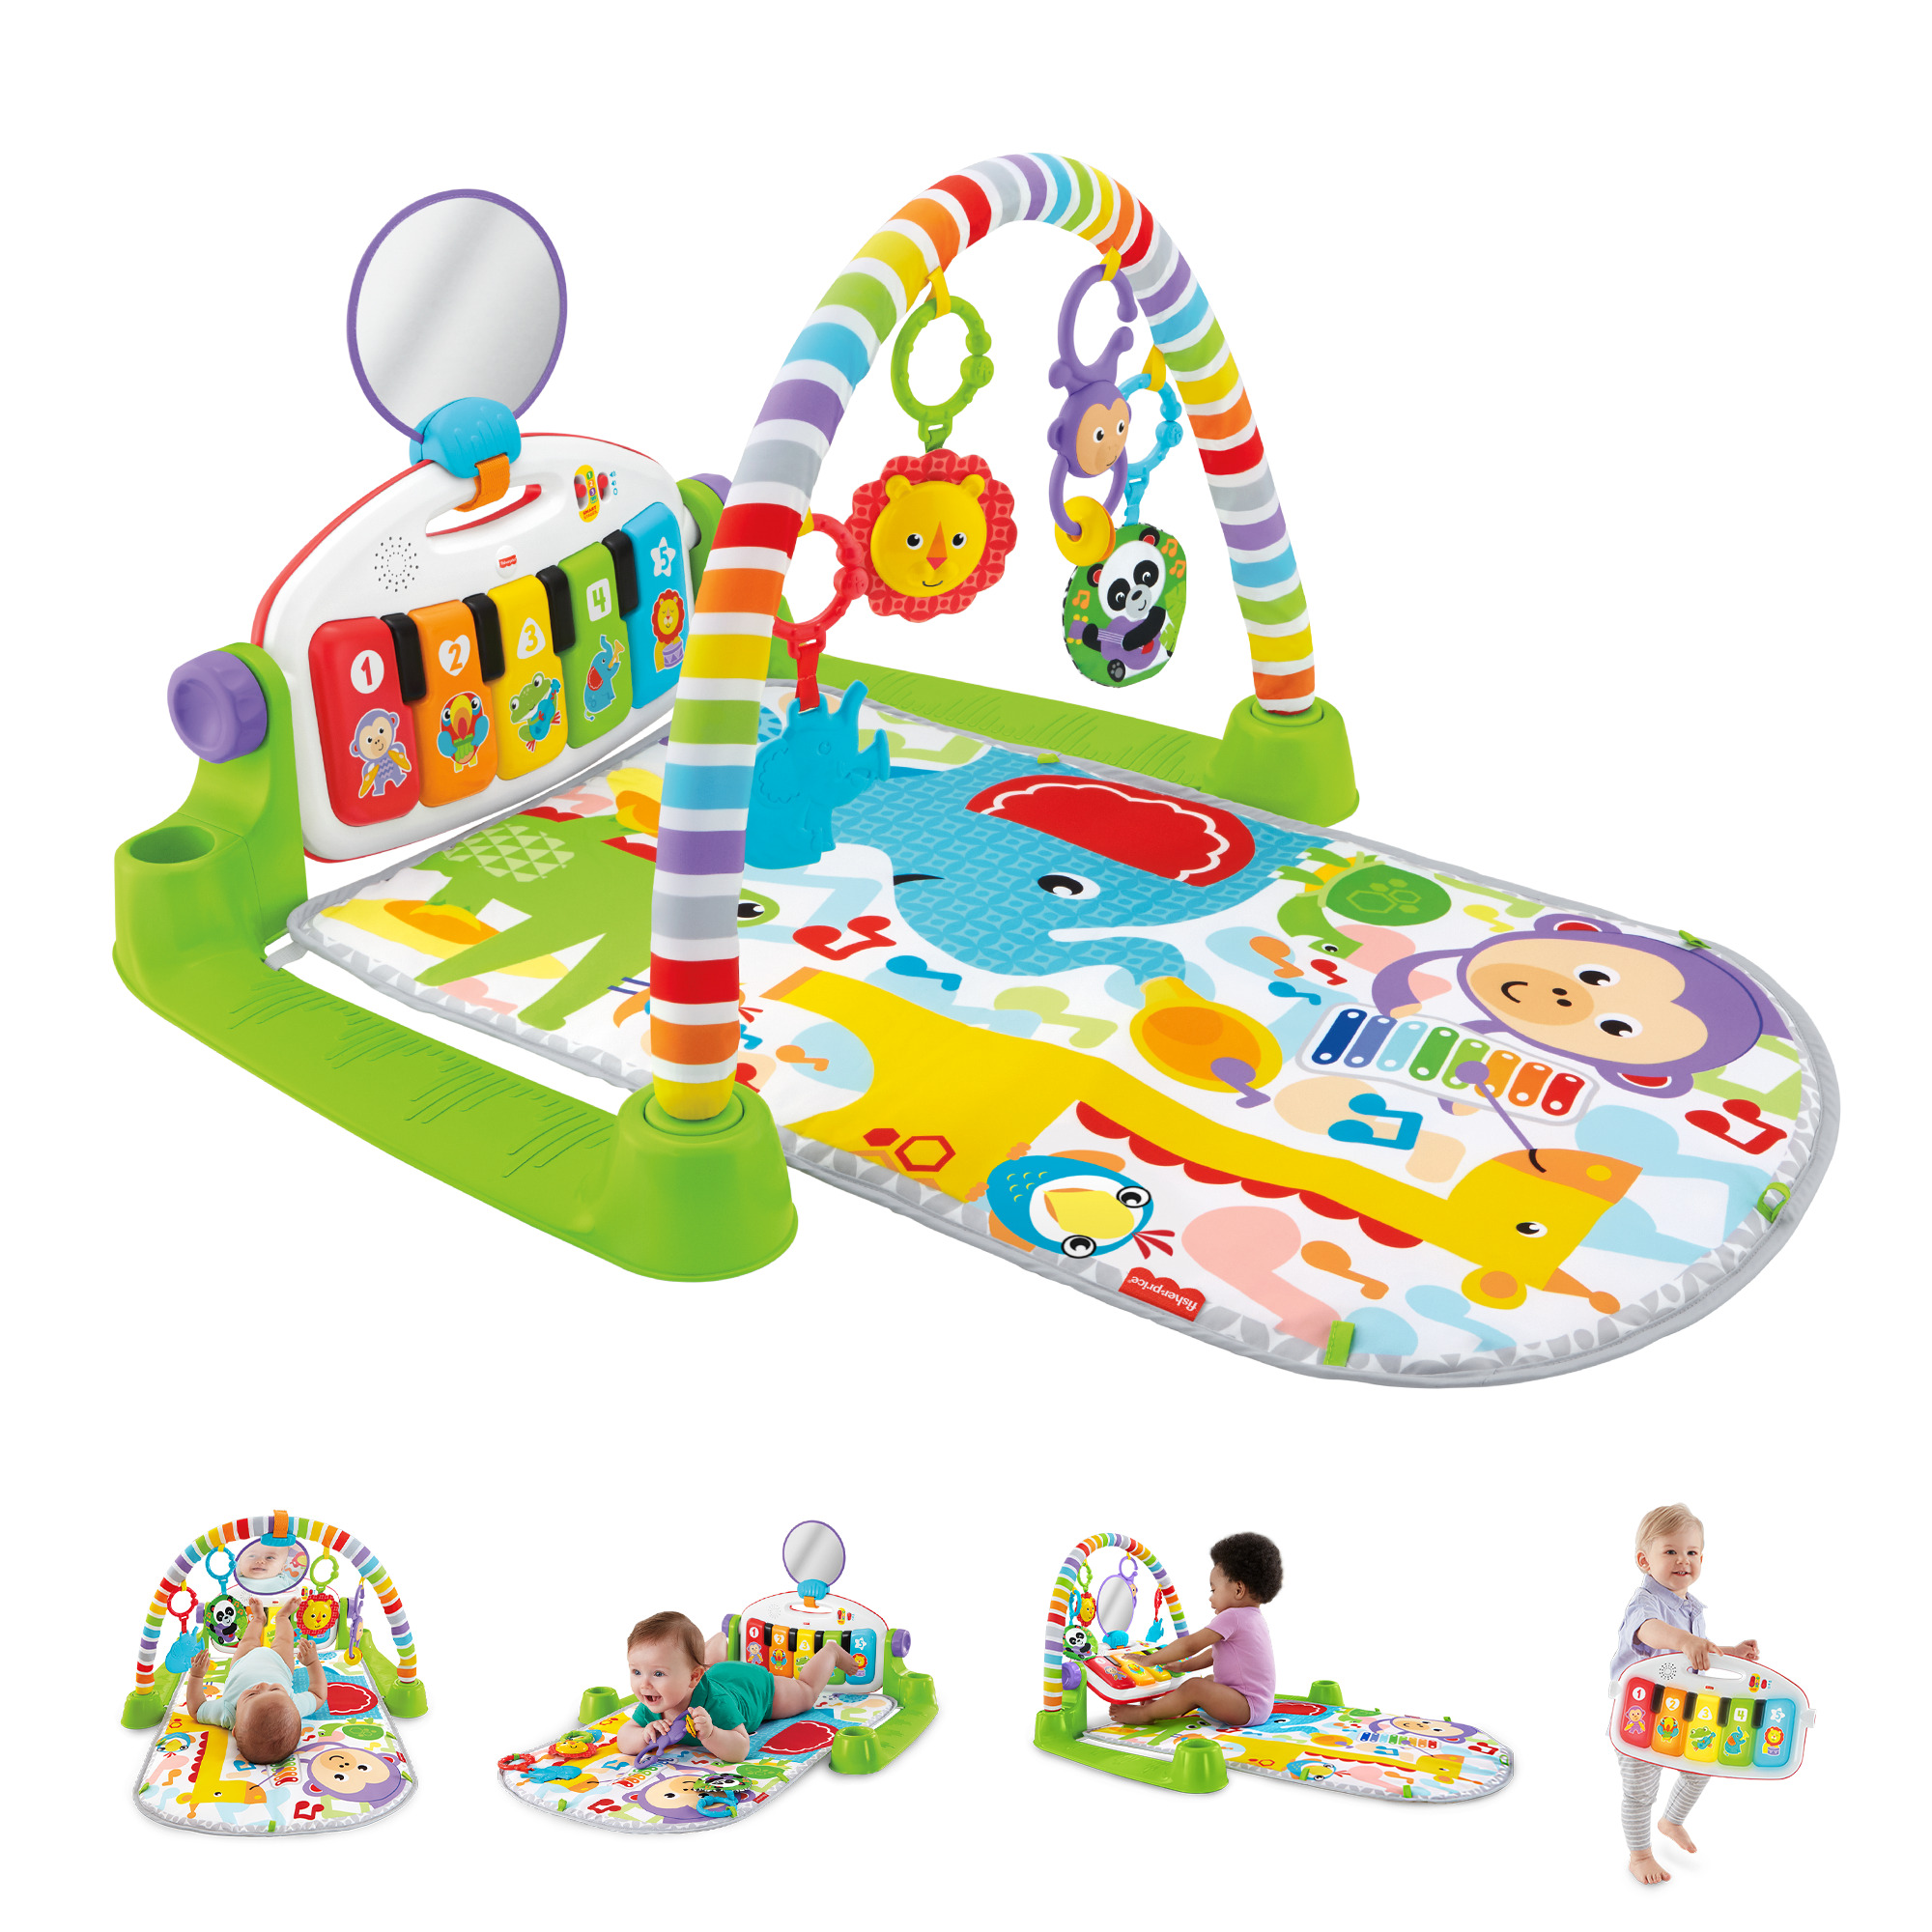 Fisher-Price Deluxe Kick & Play Piano Gym Infant Playmat with Electronic Learning Toy, Green - image 1 of 10